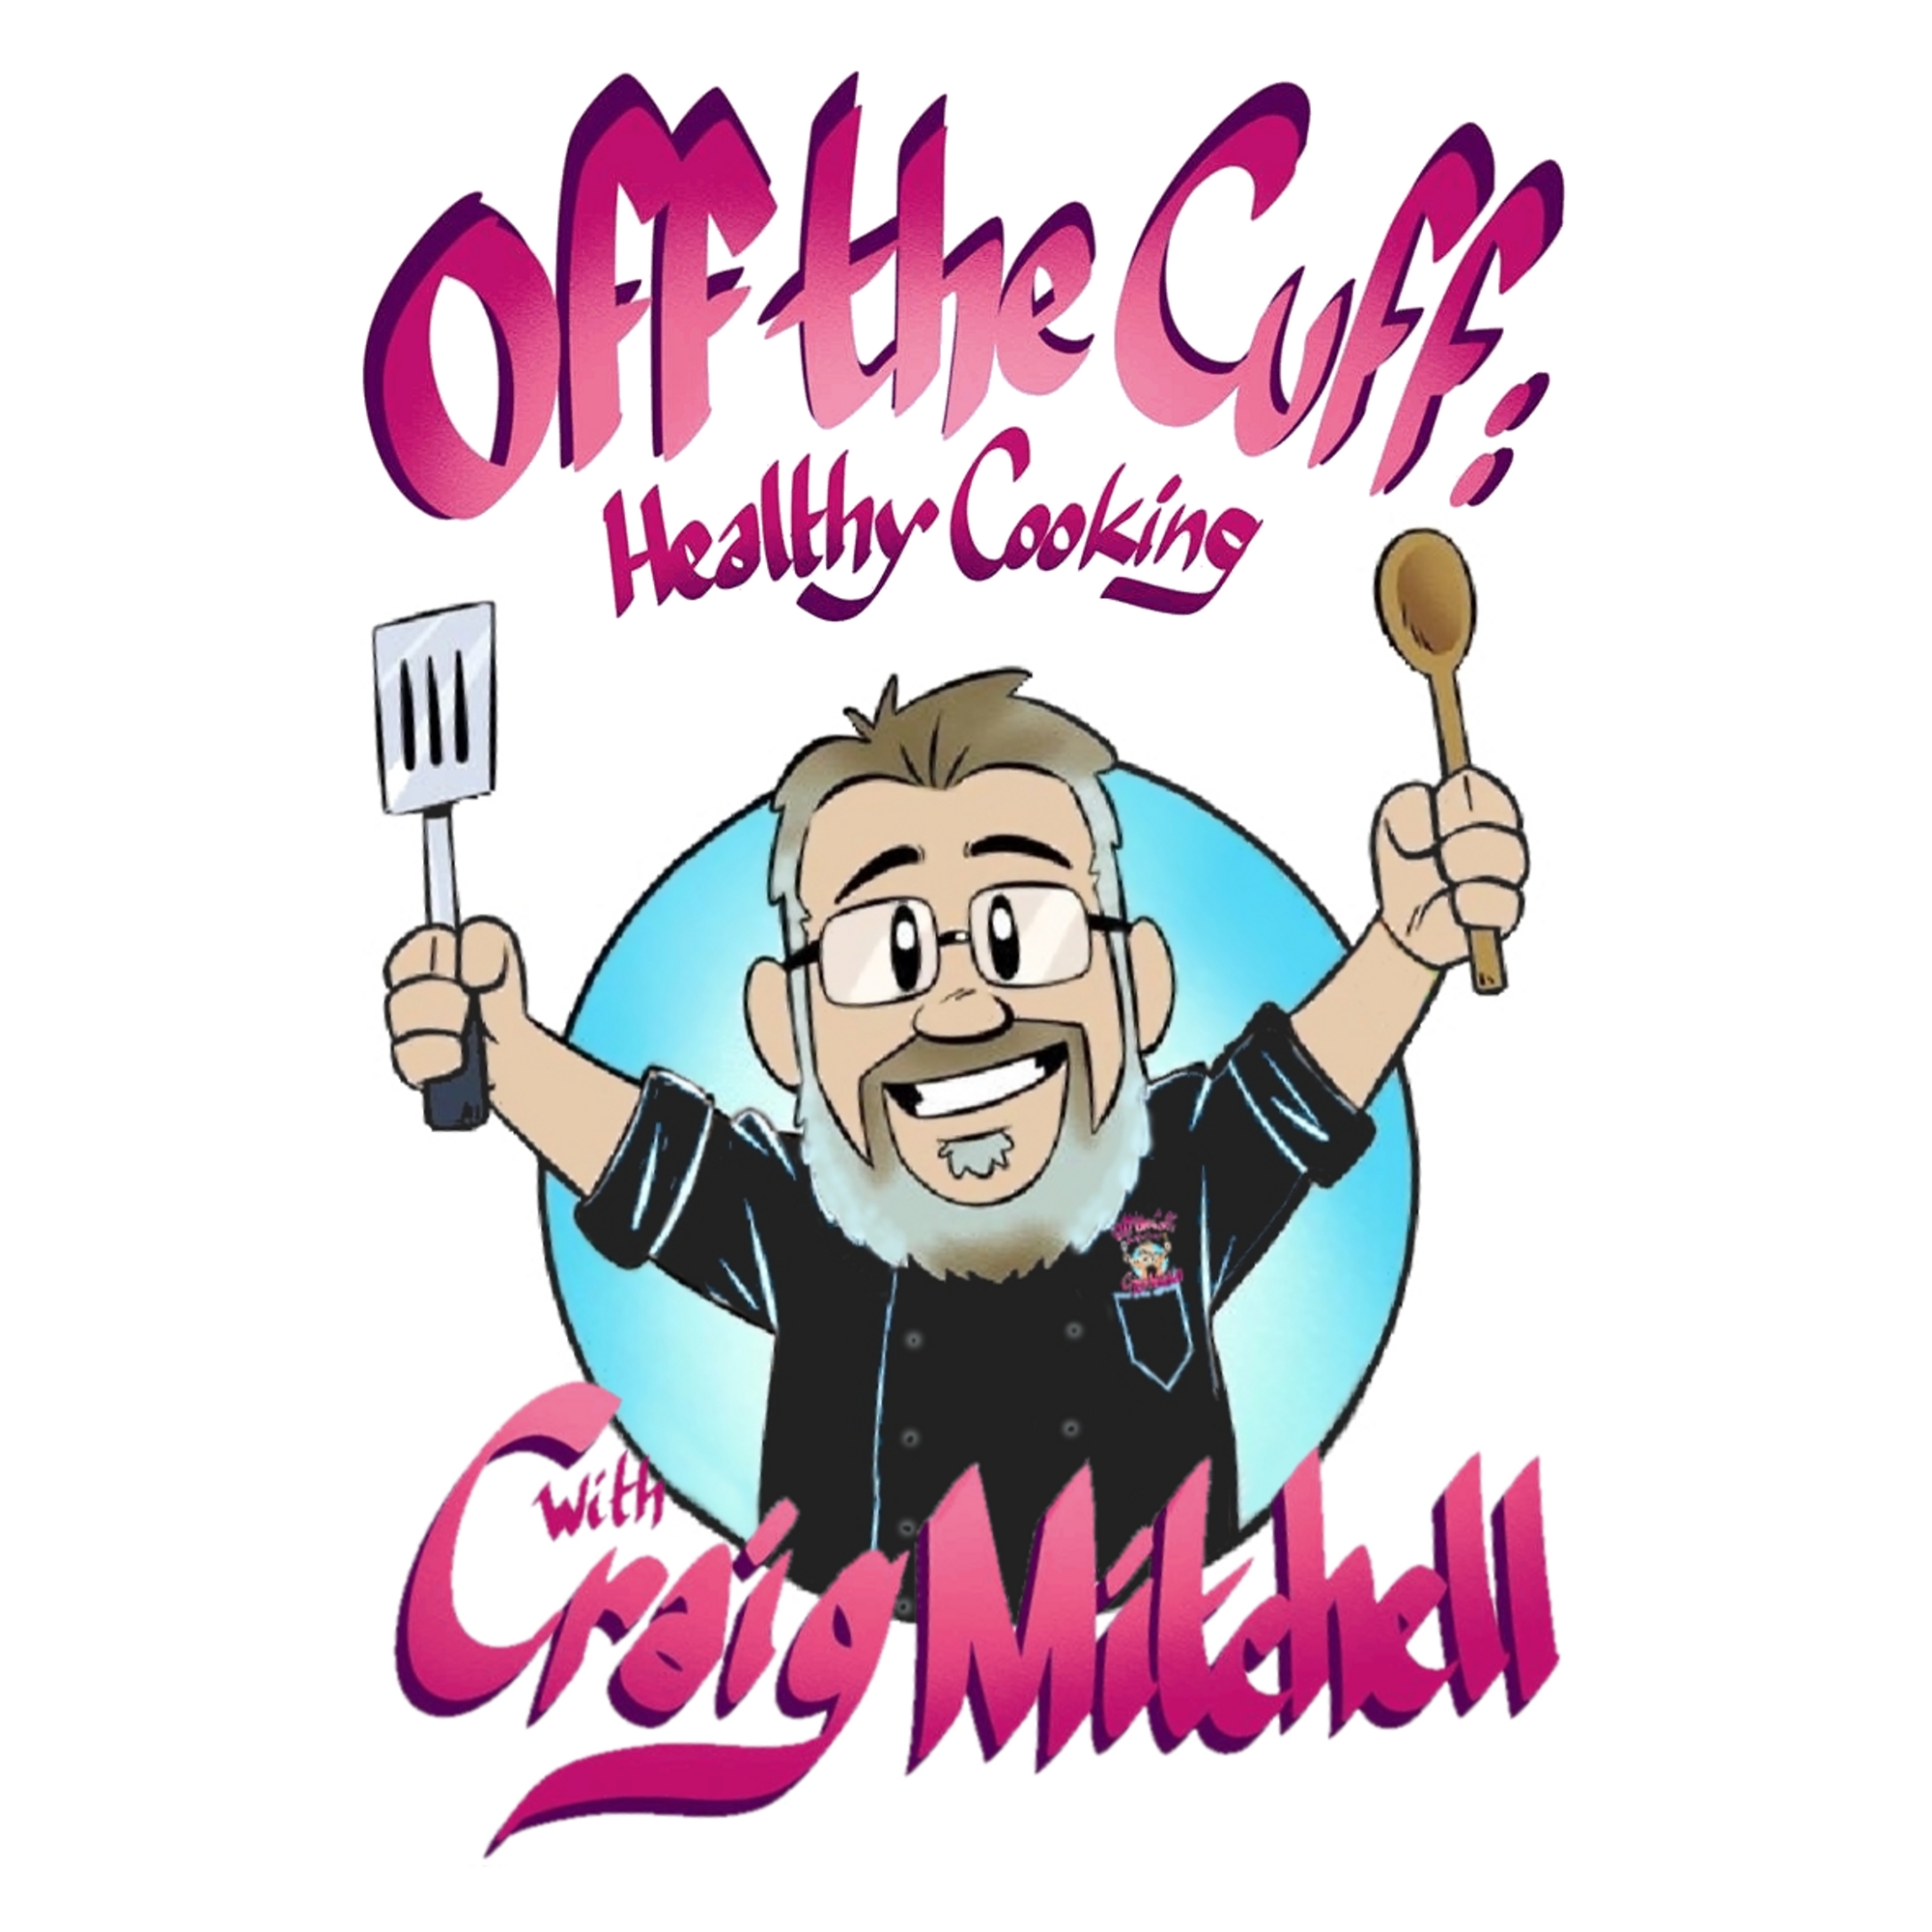 Off the Cuff: Healthy Cooking with Craig Mitchell